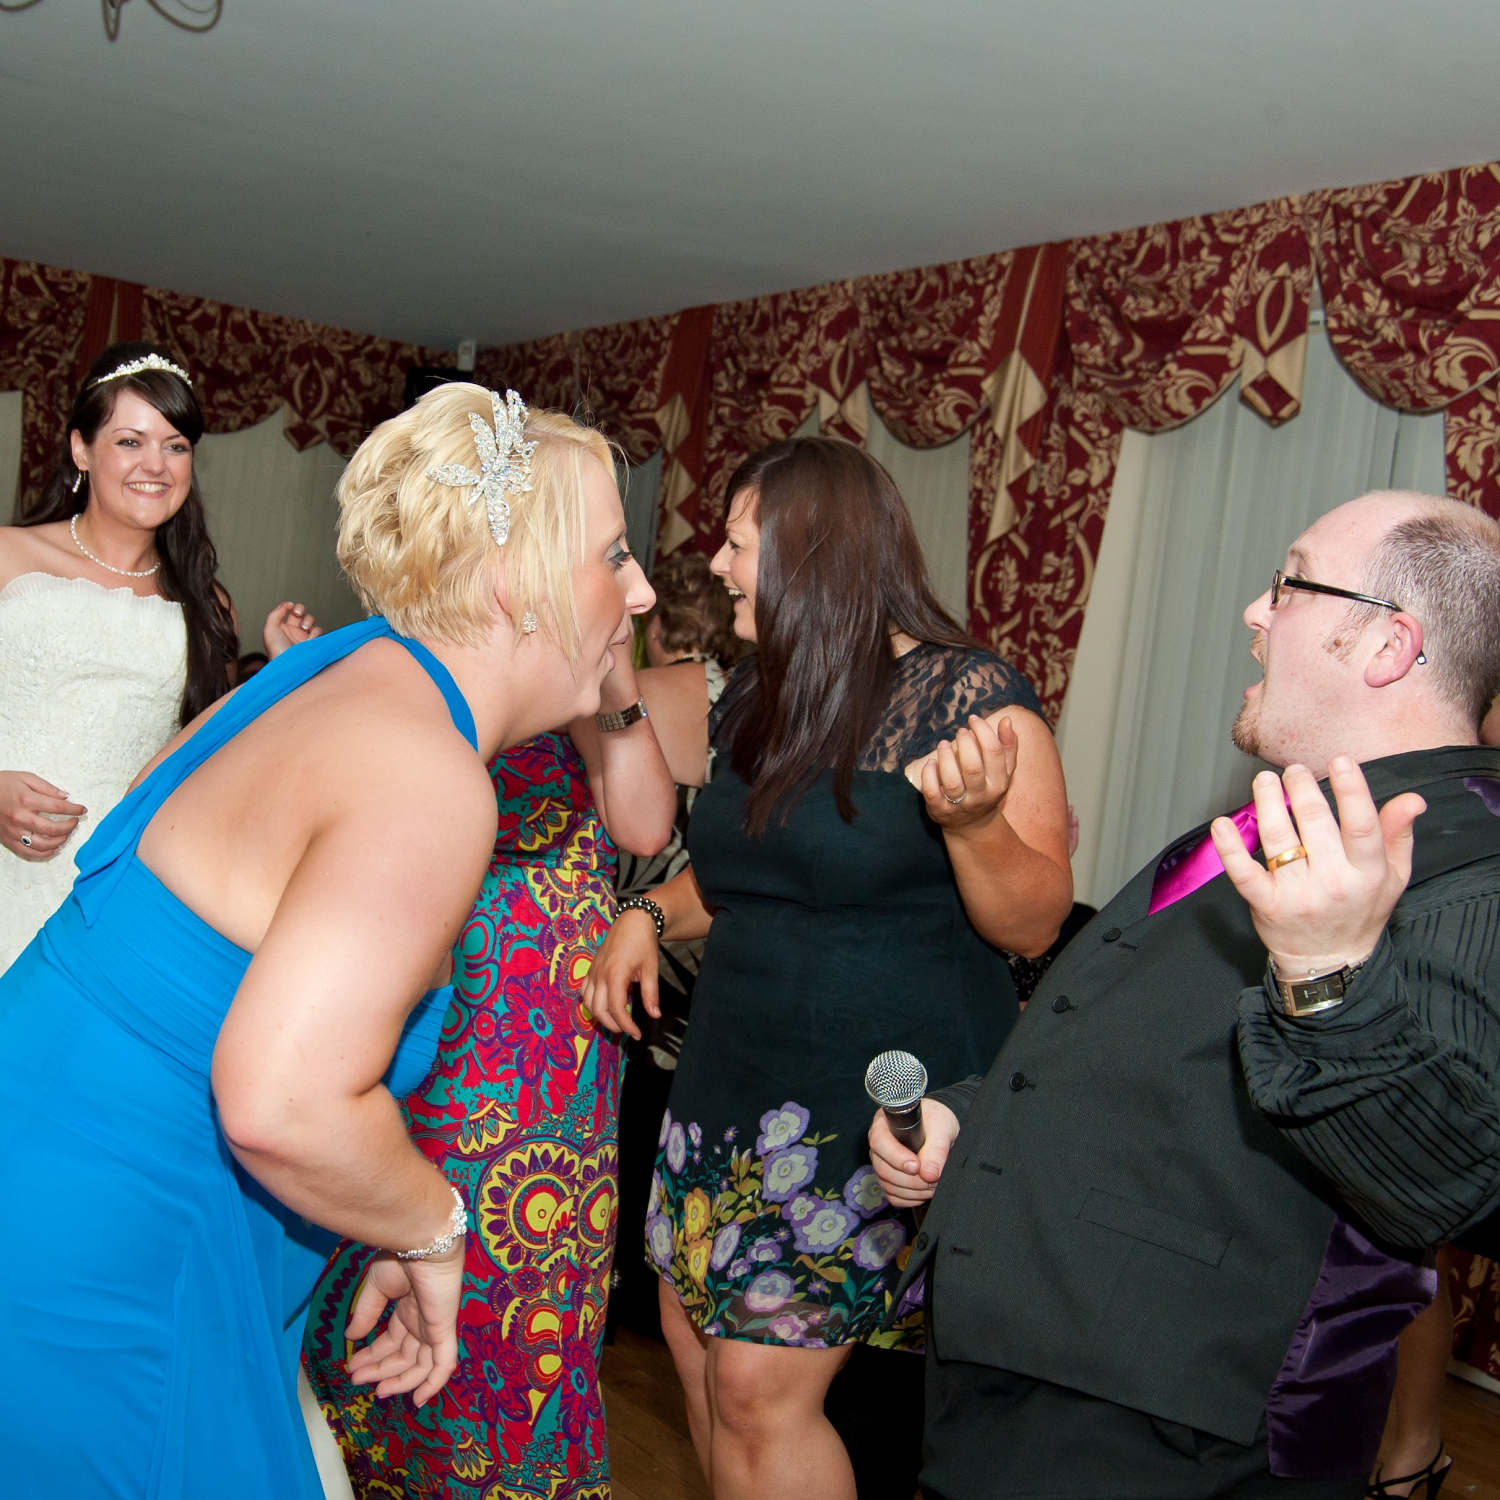 Jon Paul singer and bride with guests sing along and play air guitar at wedding reception in wales.